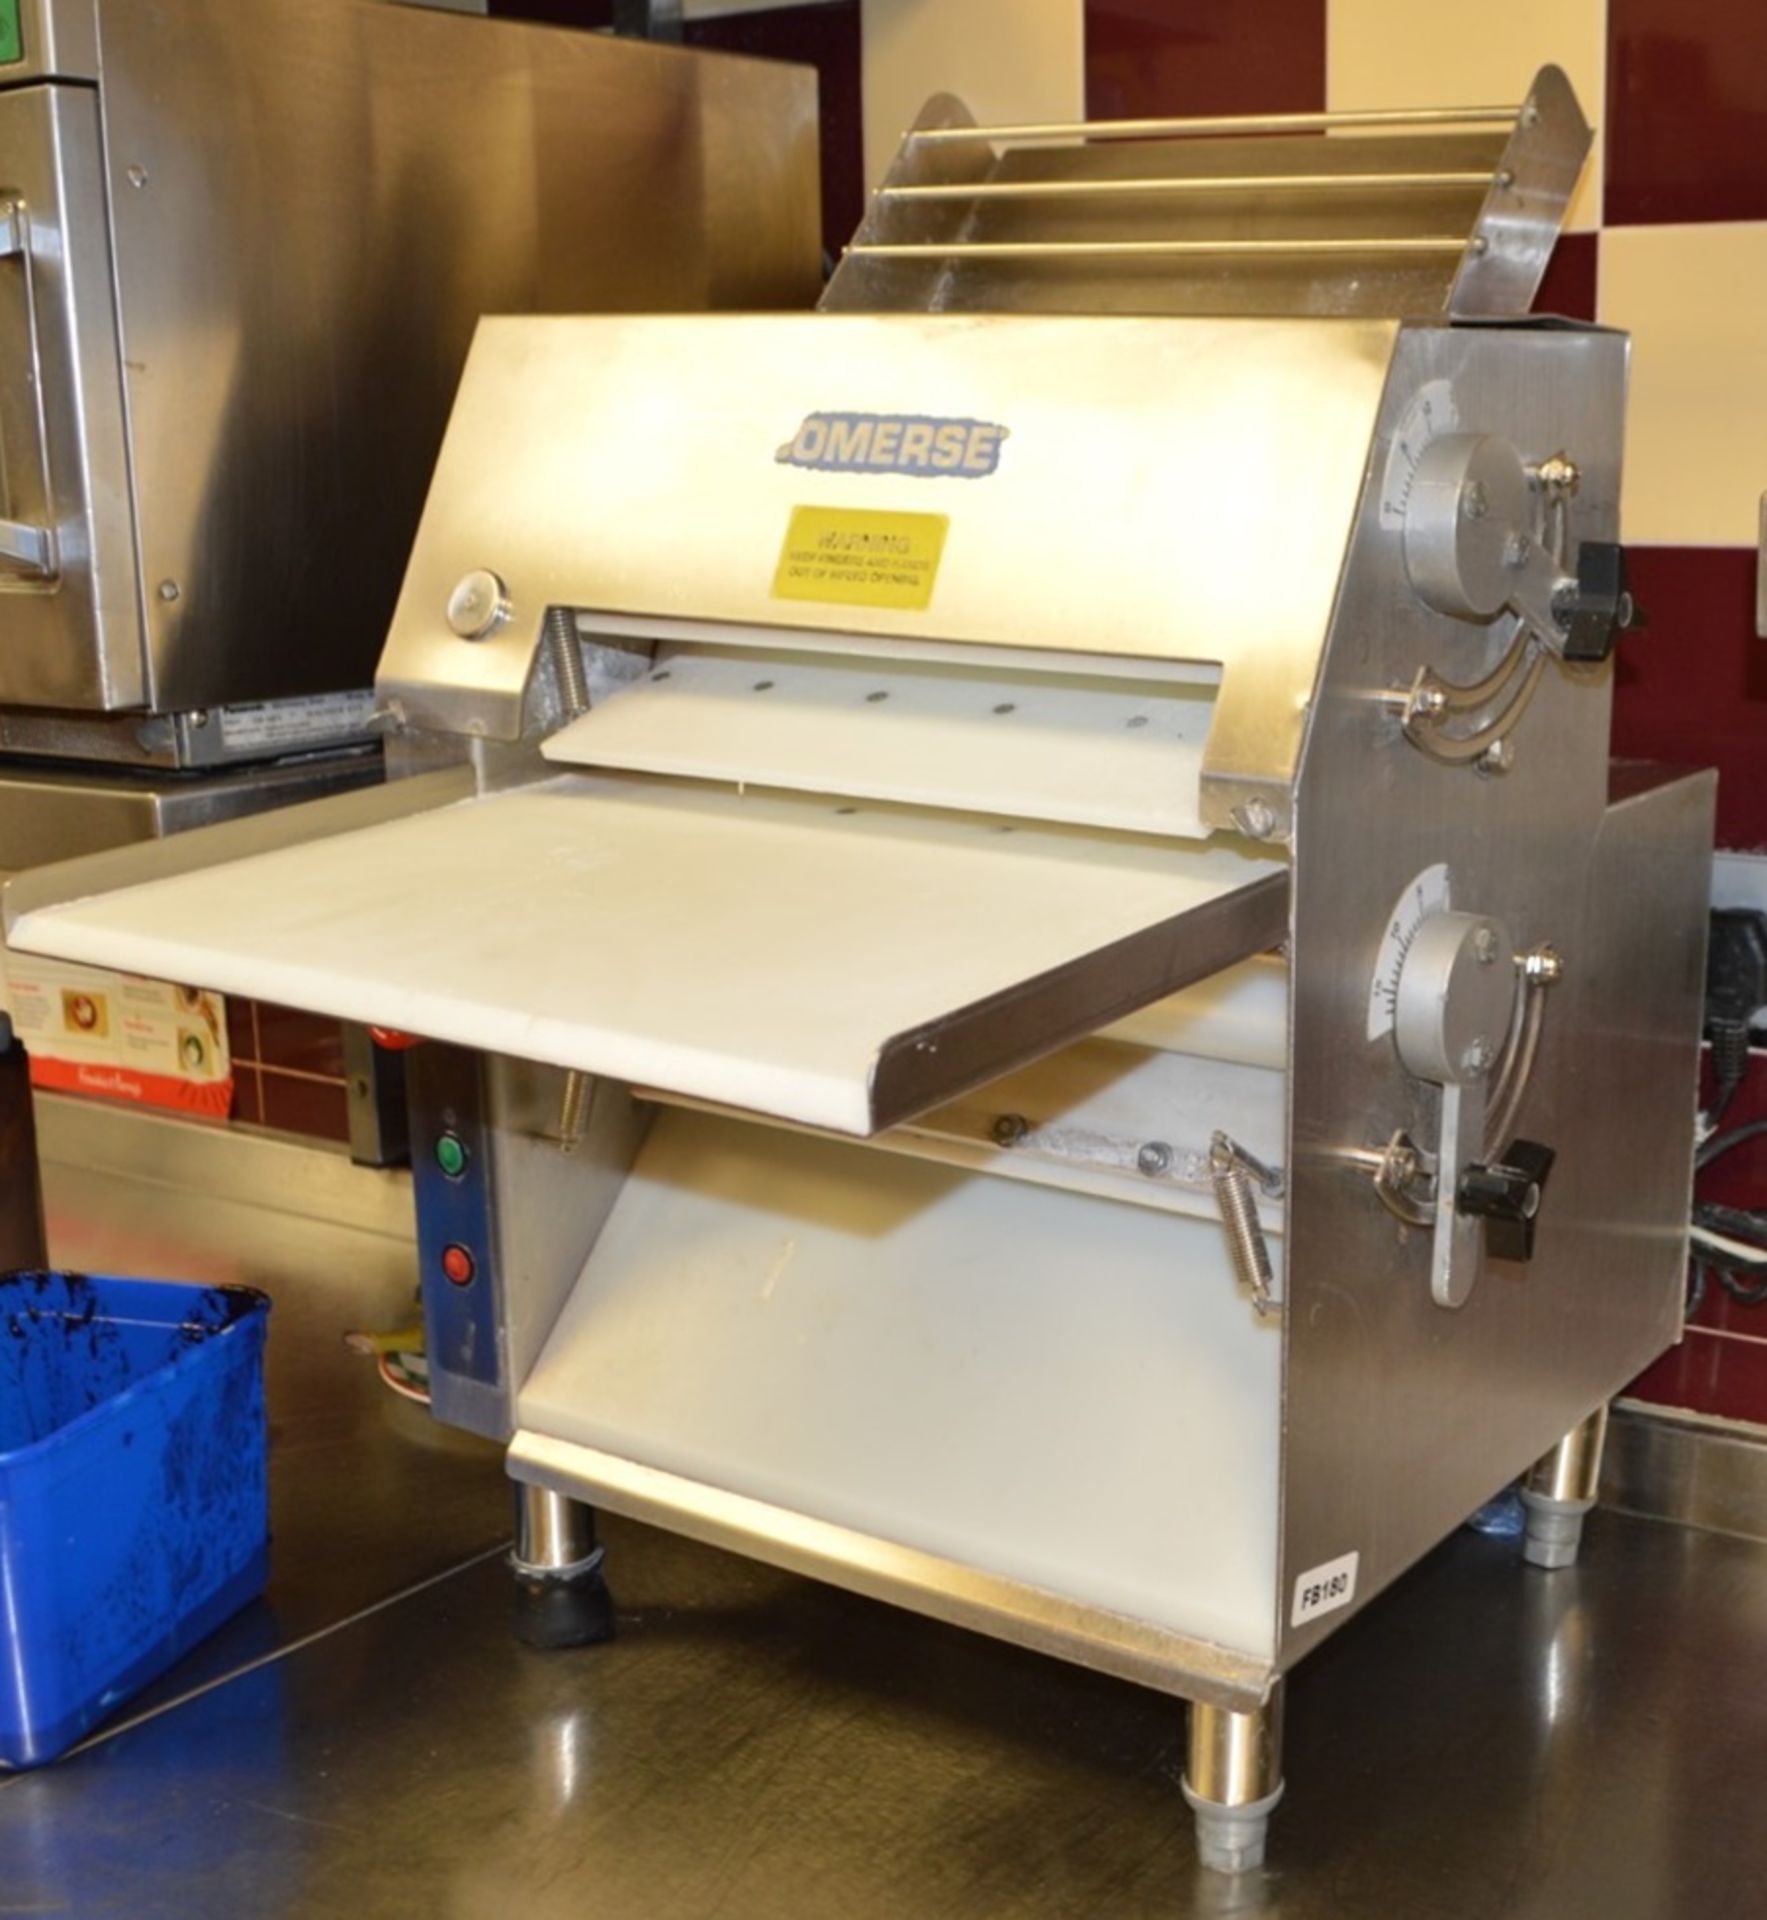 1 x Somerset Dough Roller - Model CDR1550 - Suitable For Pizza, Naans, Chatati Wraps etc - Ref FB180 - Image 6 of 6